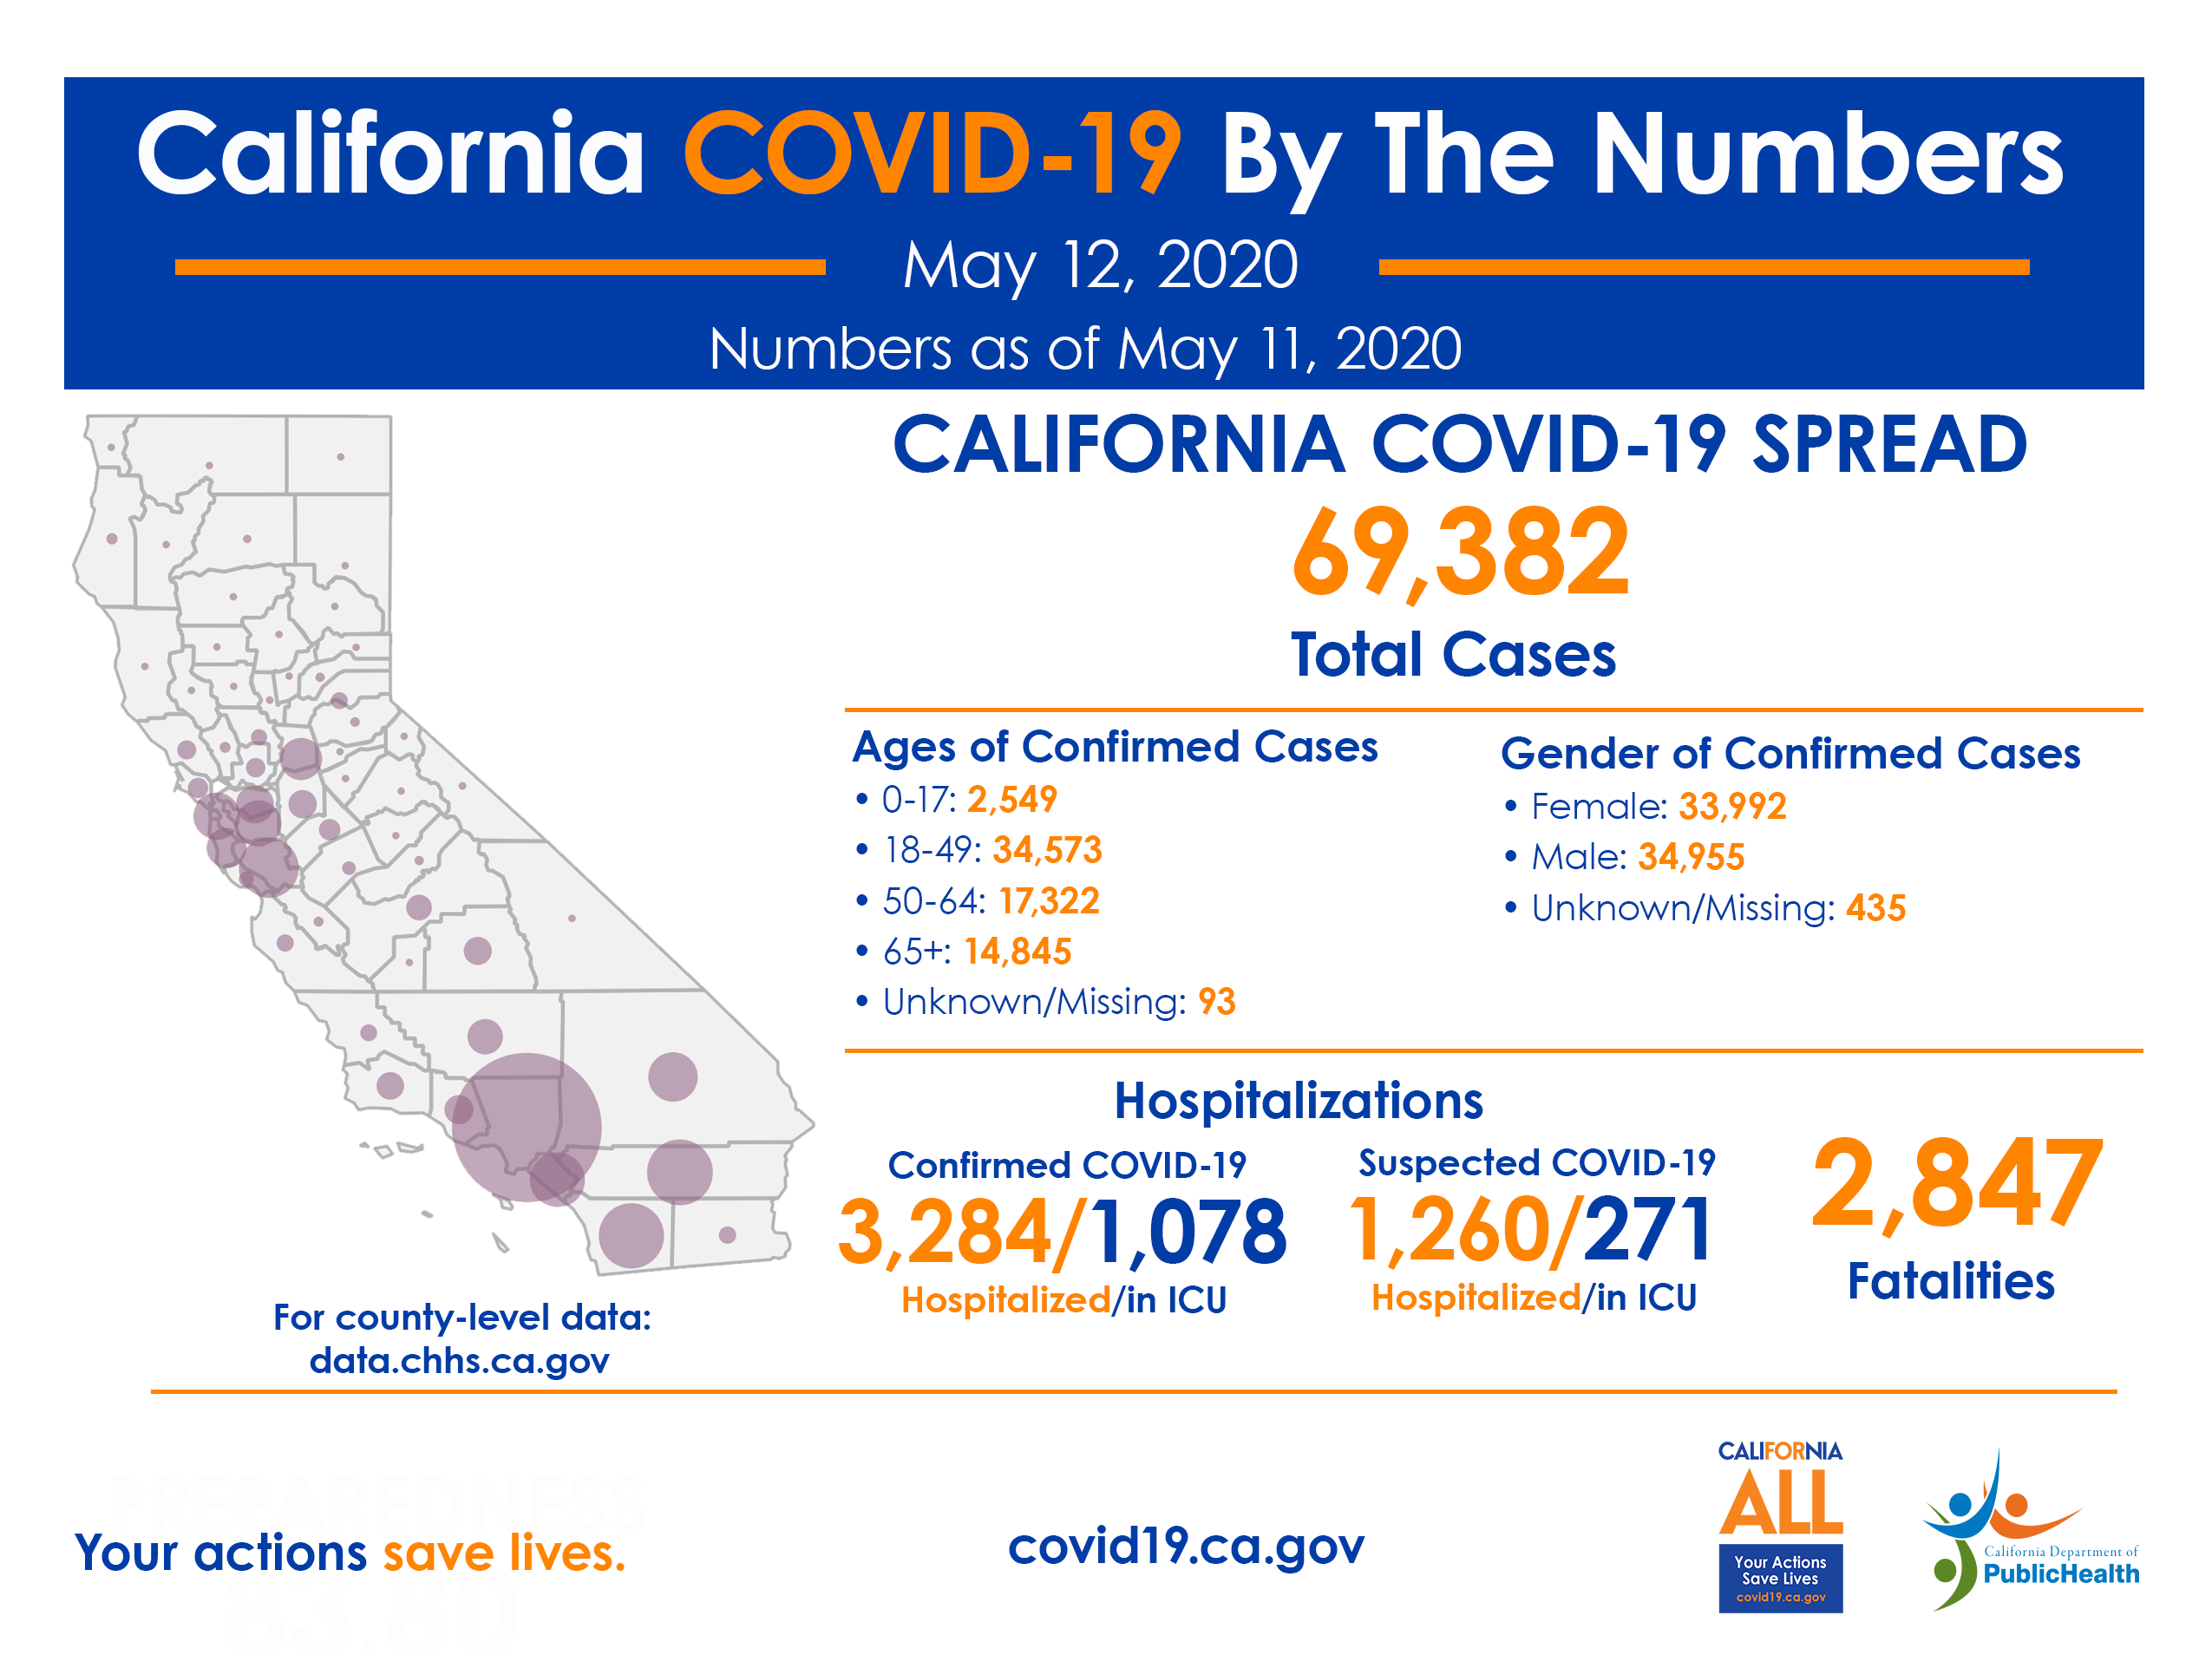 CA COVID-19 by the numbers